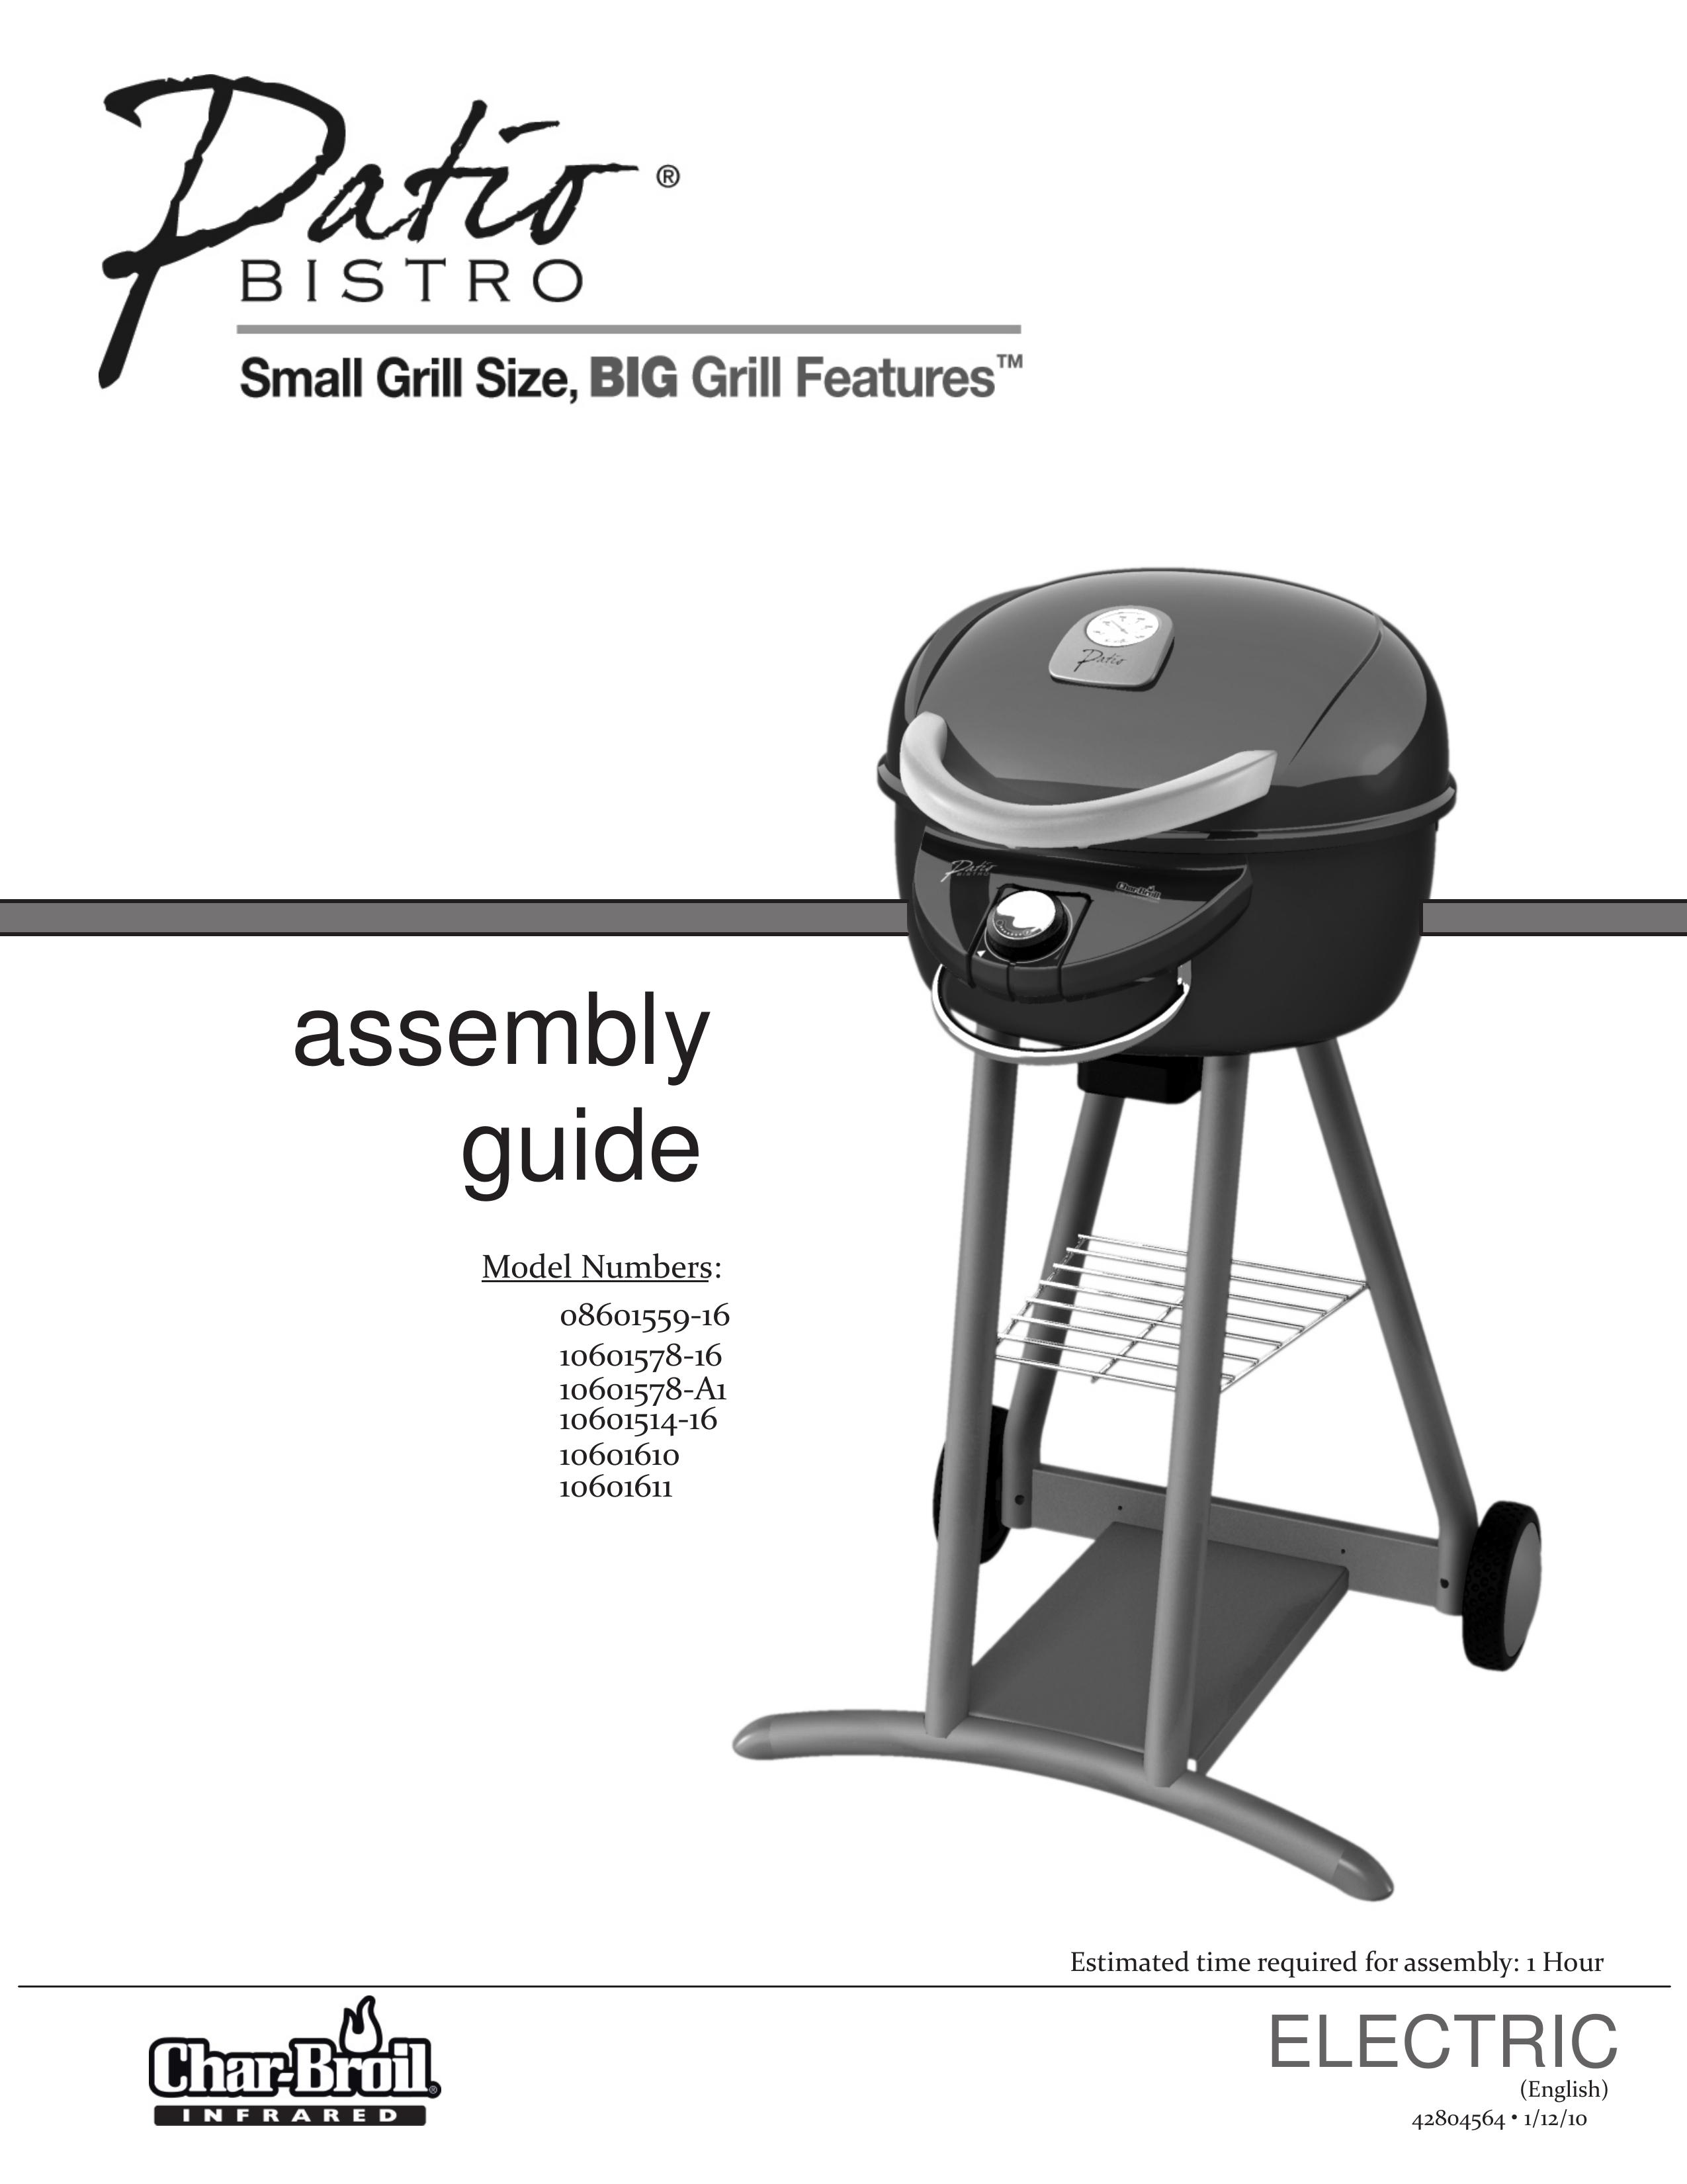 Char-Broil 10601578-A1 Electric Grill User Manual (Page 1)